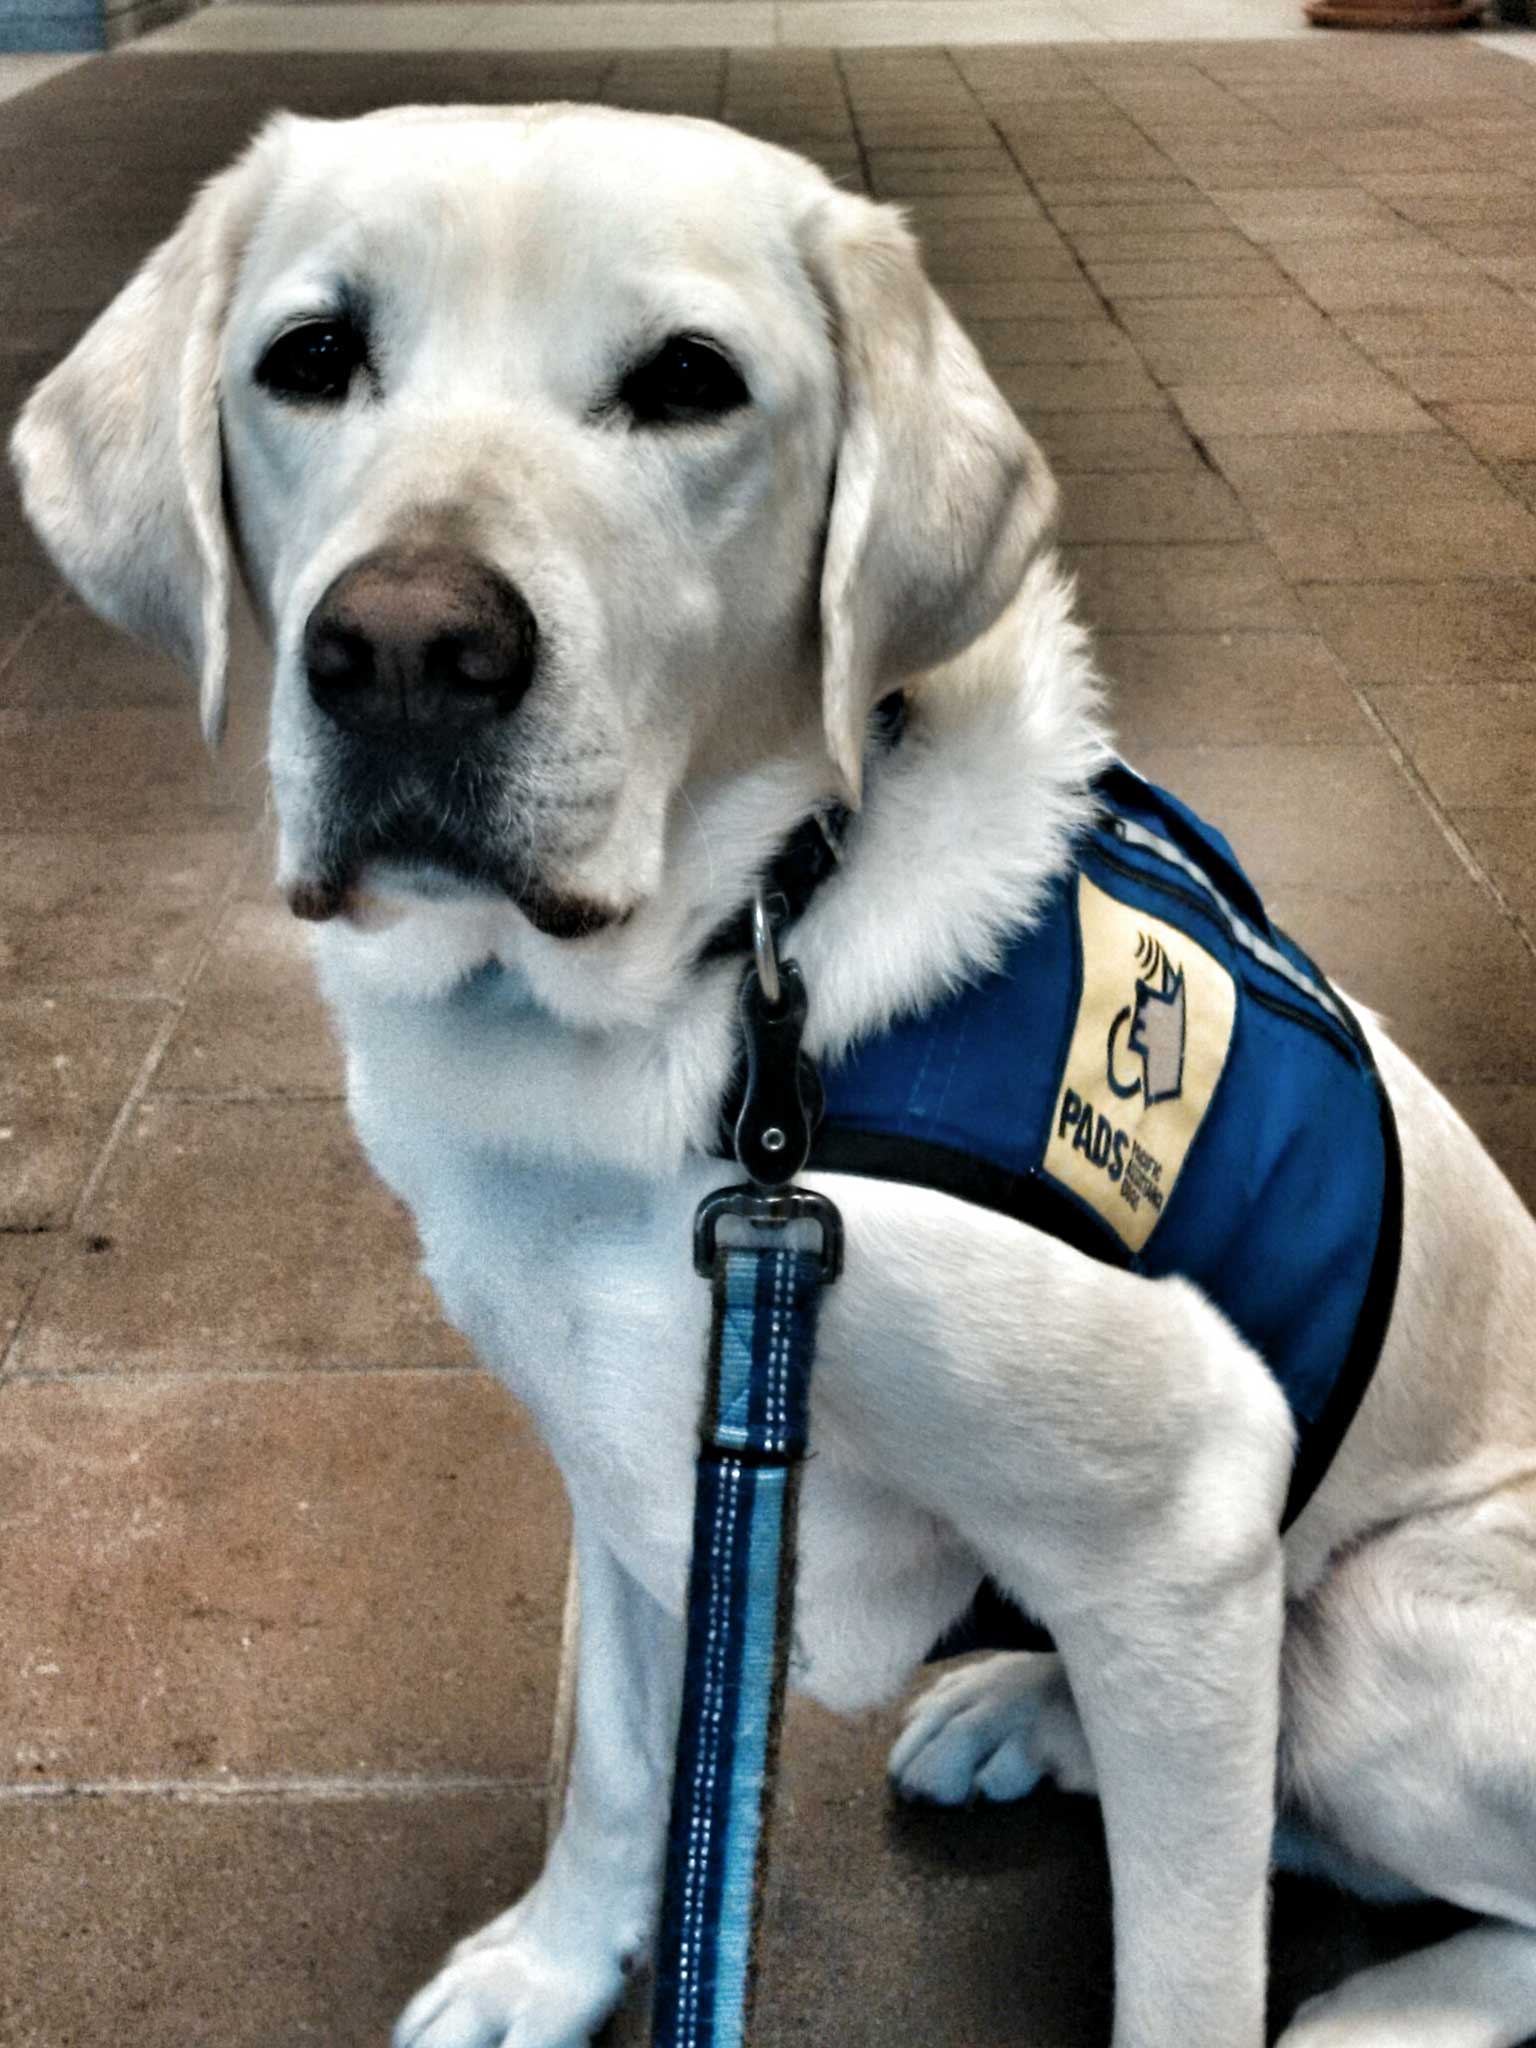 Caber has been part of the police unit since 2010